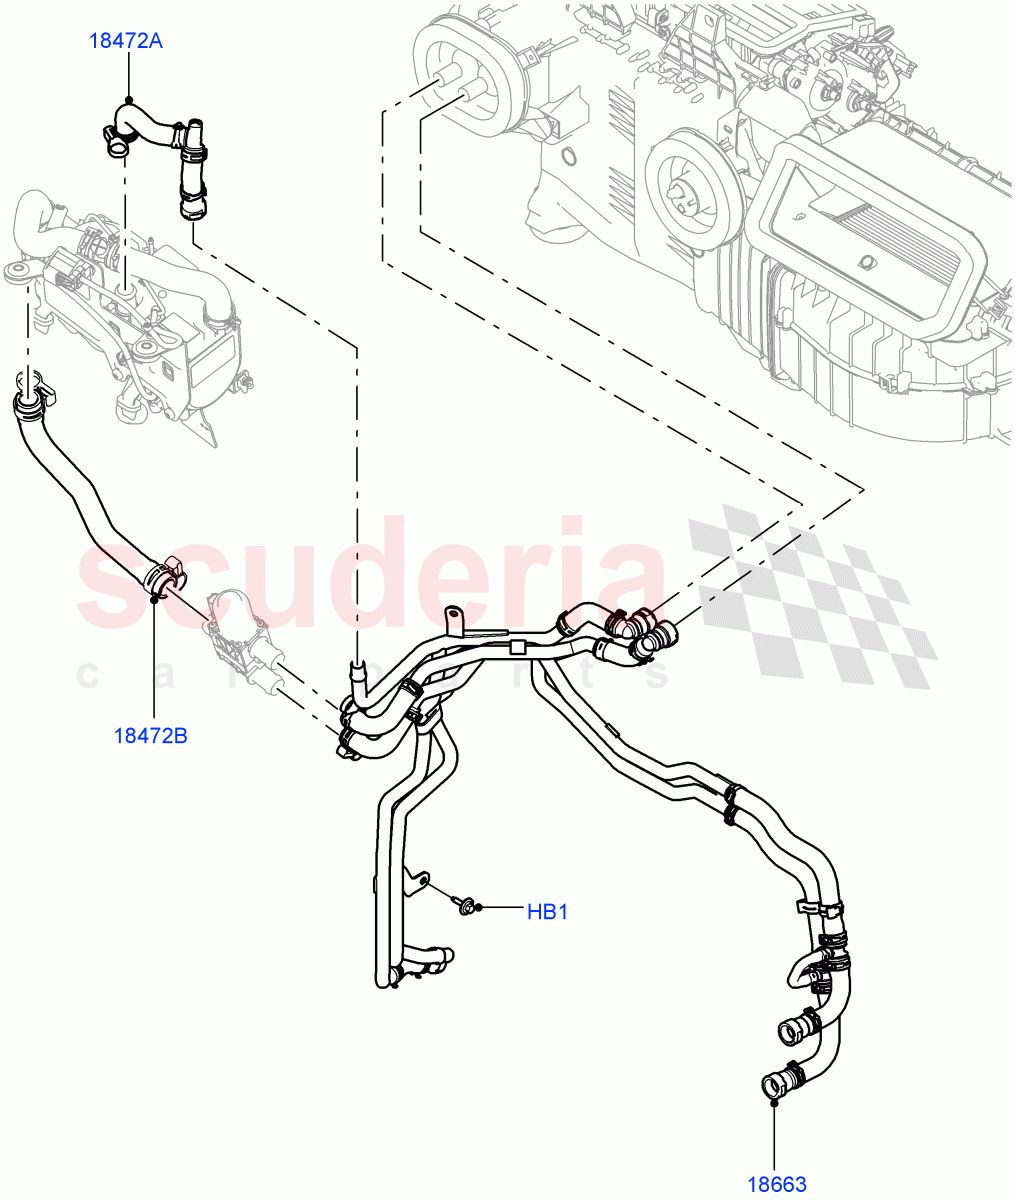 Heater Hoses(Front)(2.0L I4 DSL HIGH DOHC AJ200,With Fuel Fired Heater,With Air Conditioning - Front/Rear,Park Heating With Remote Control)((V)FROMHA000001,(V)TOHA999999) of Land Rover Land Rover Range Rover Sport (2014+) [5.0 OHC SGDI SC V8 Petrol]